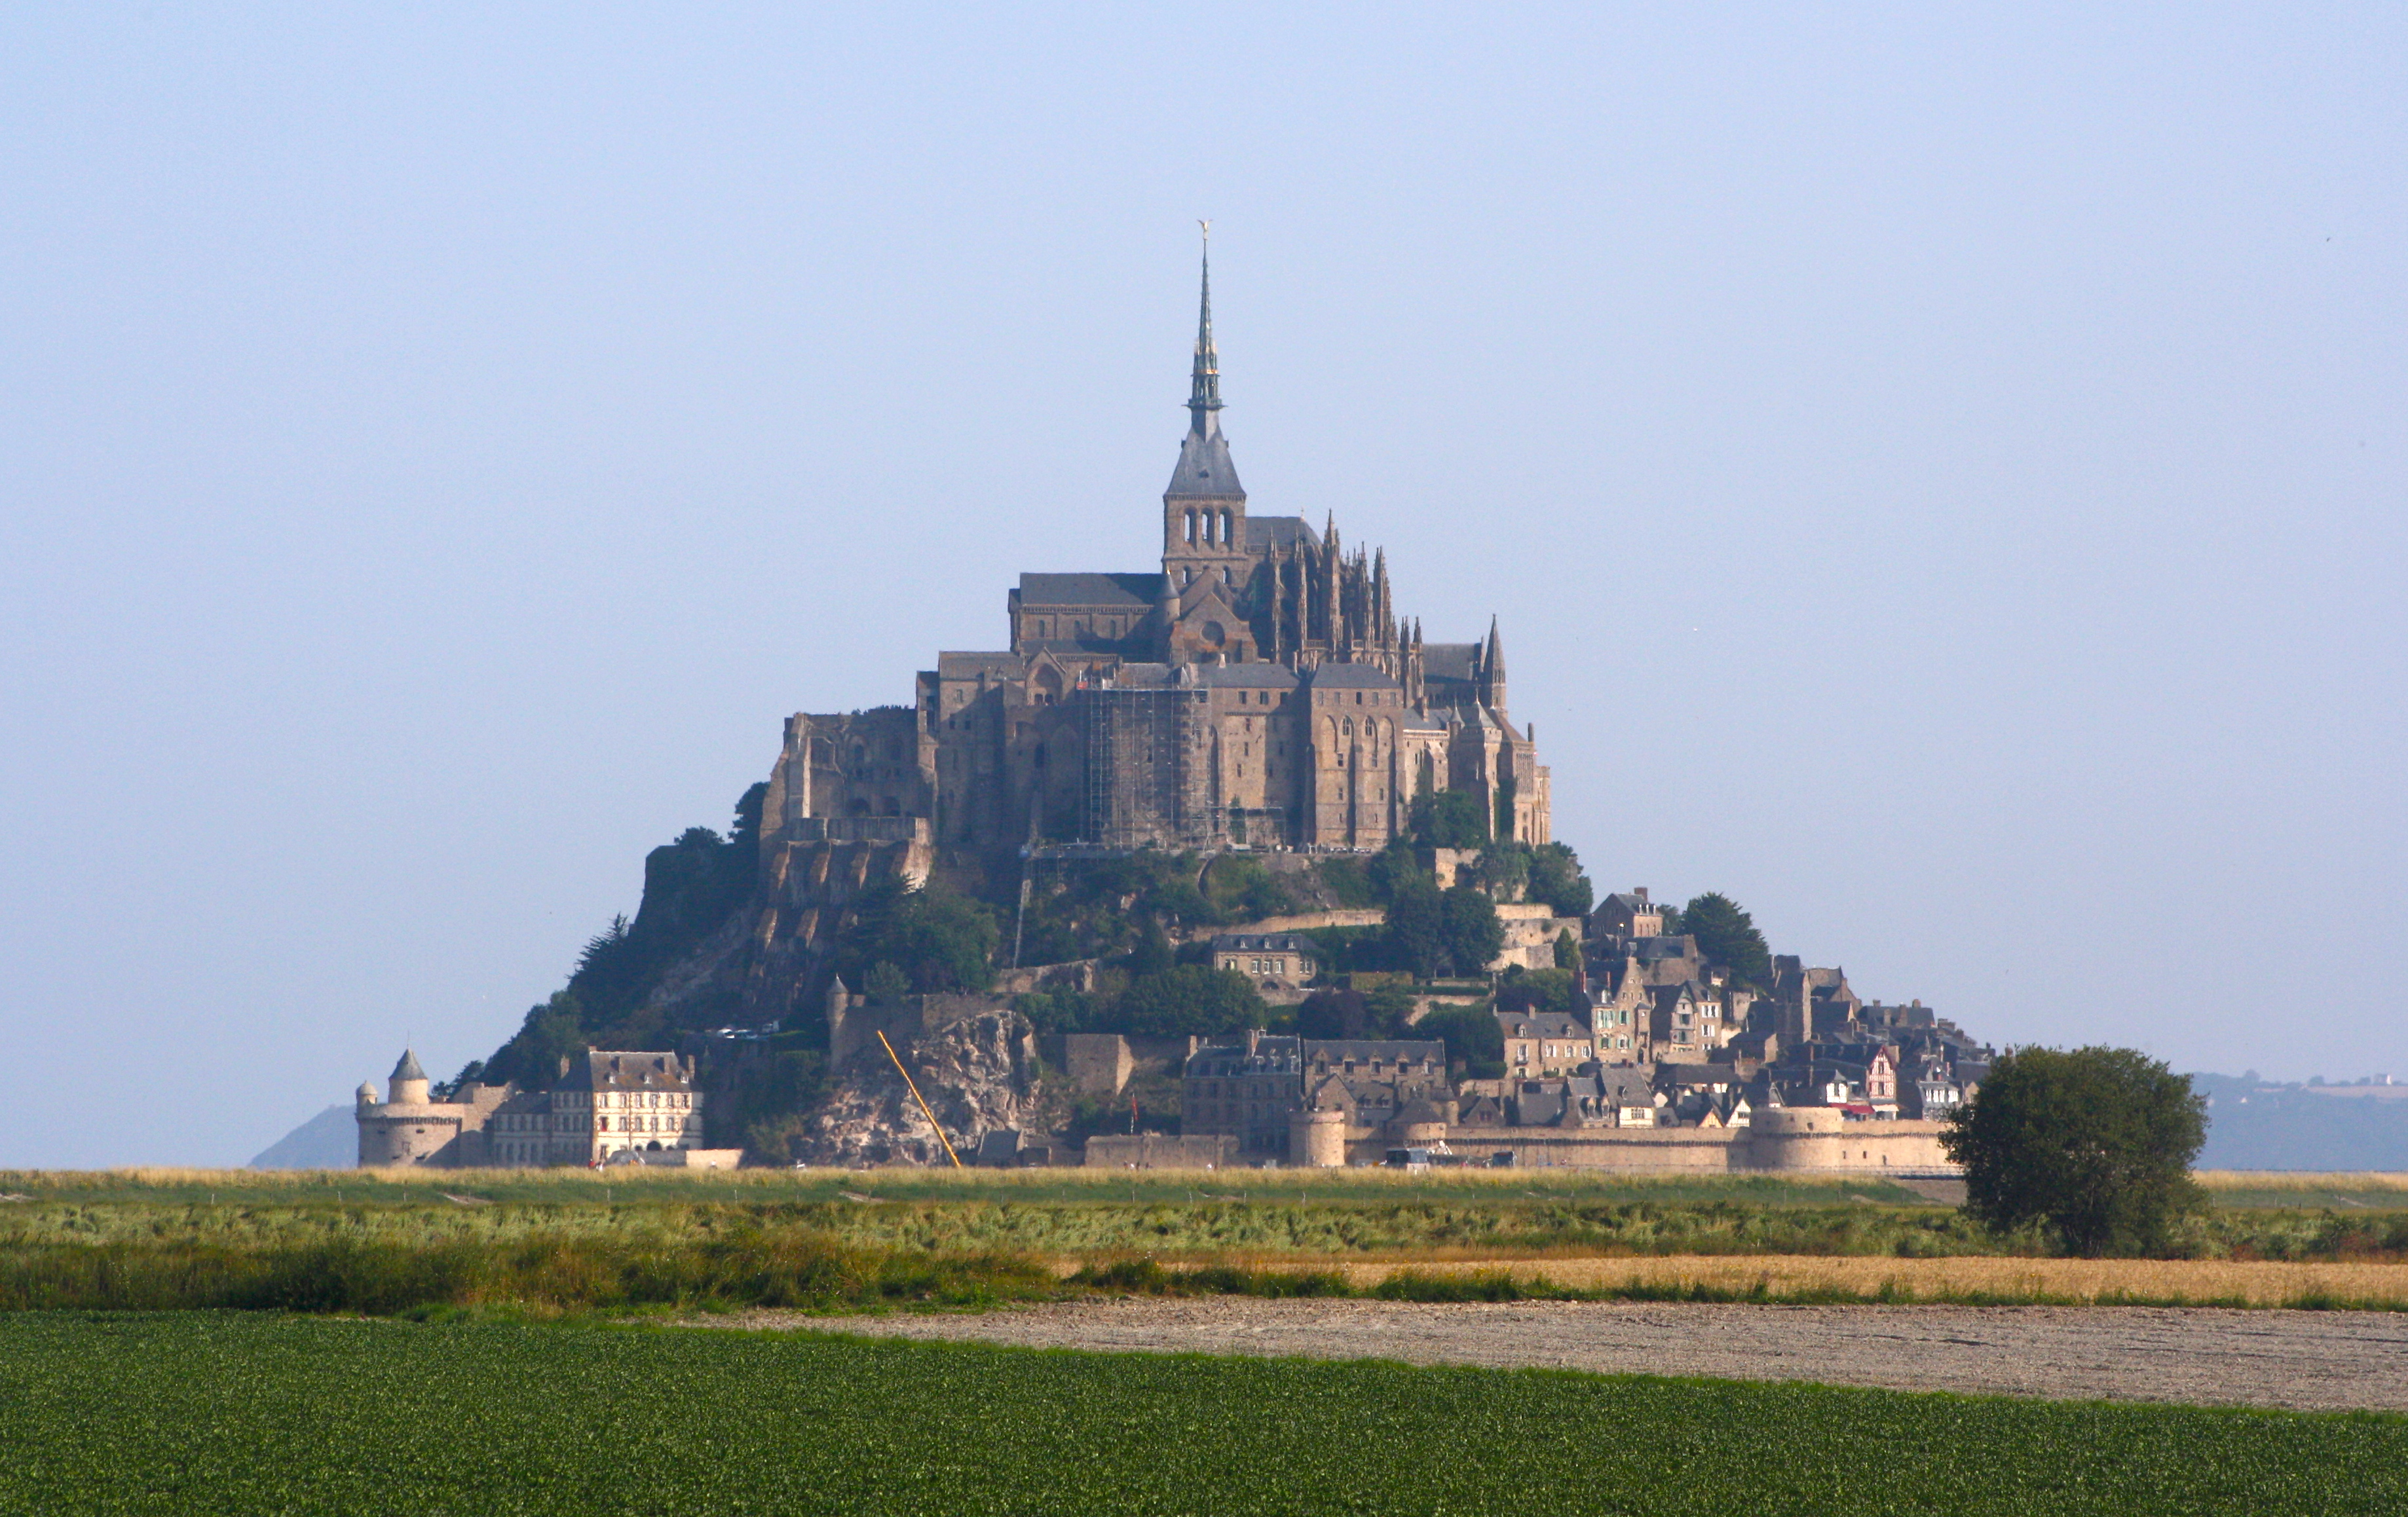 Mont-Saint-Michel, France: An Island Fortress in the English Channel